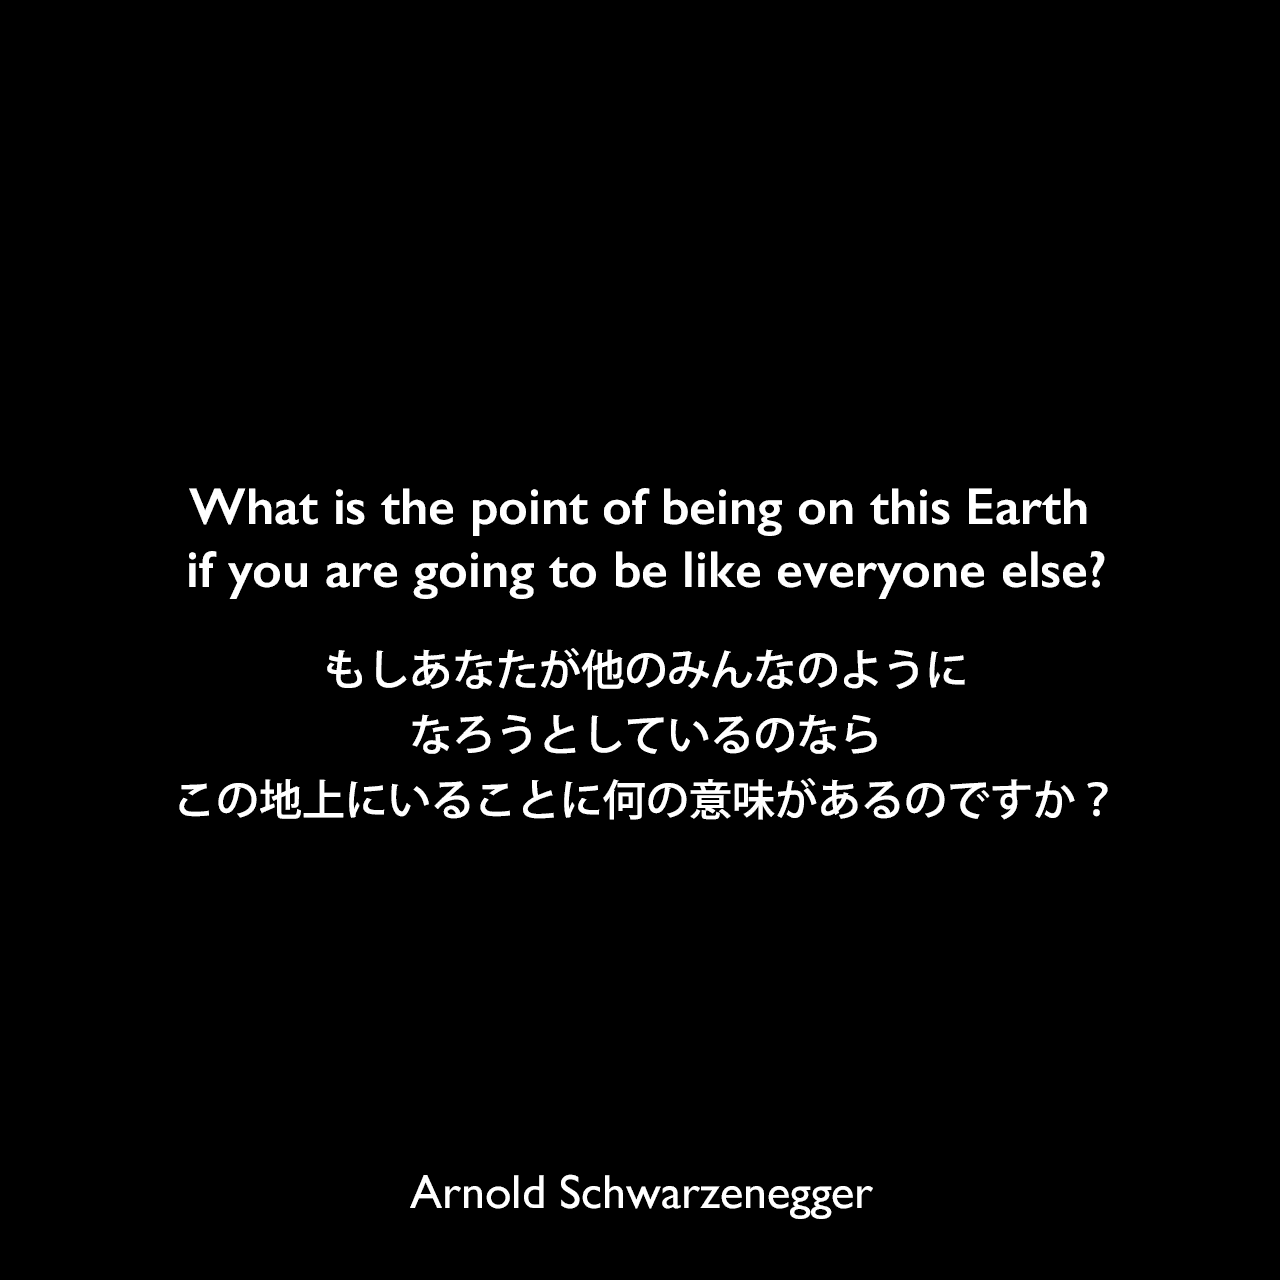 What is the point of being on this Earth if you are going to be like everyone else?もしあなたが他のみんなのようになろうとしているのなら、この地上にいることに何の意味があるのですか？